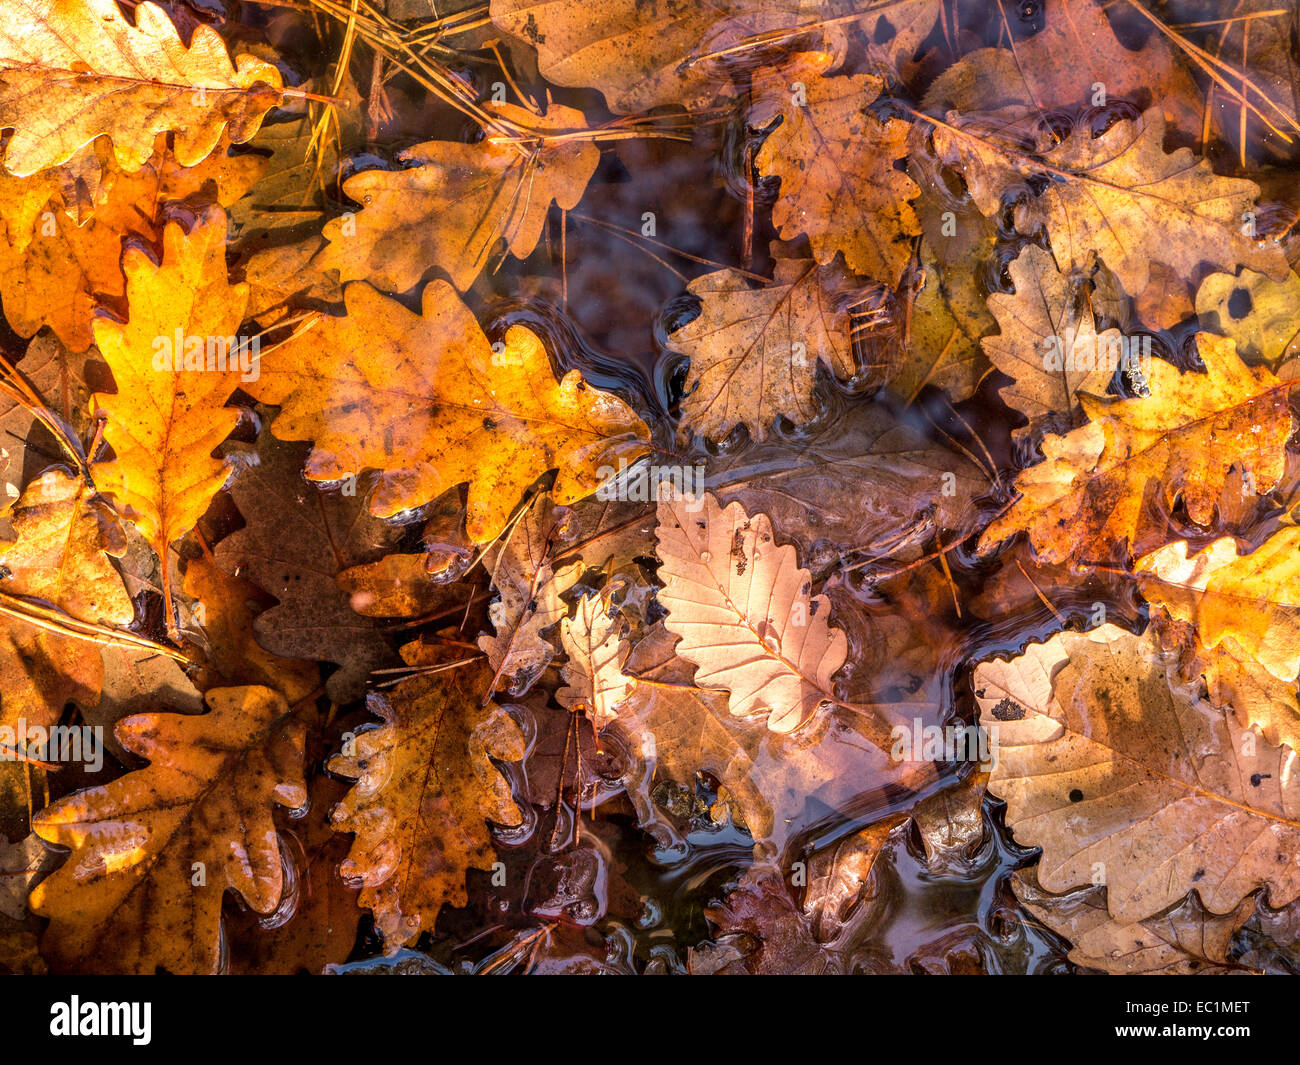 Dead fall leaves shot from above Stock Photo